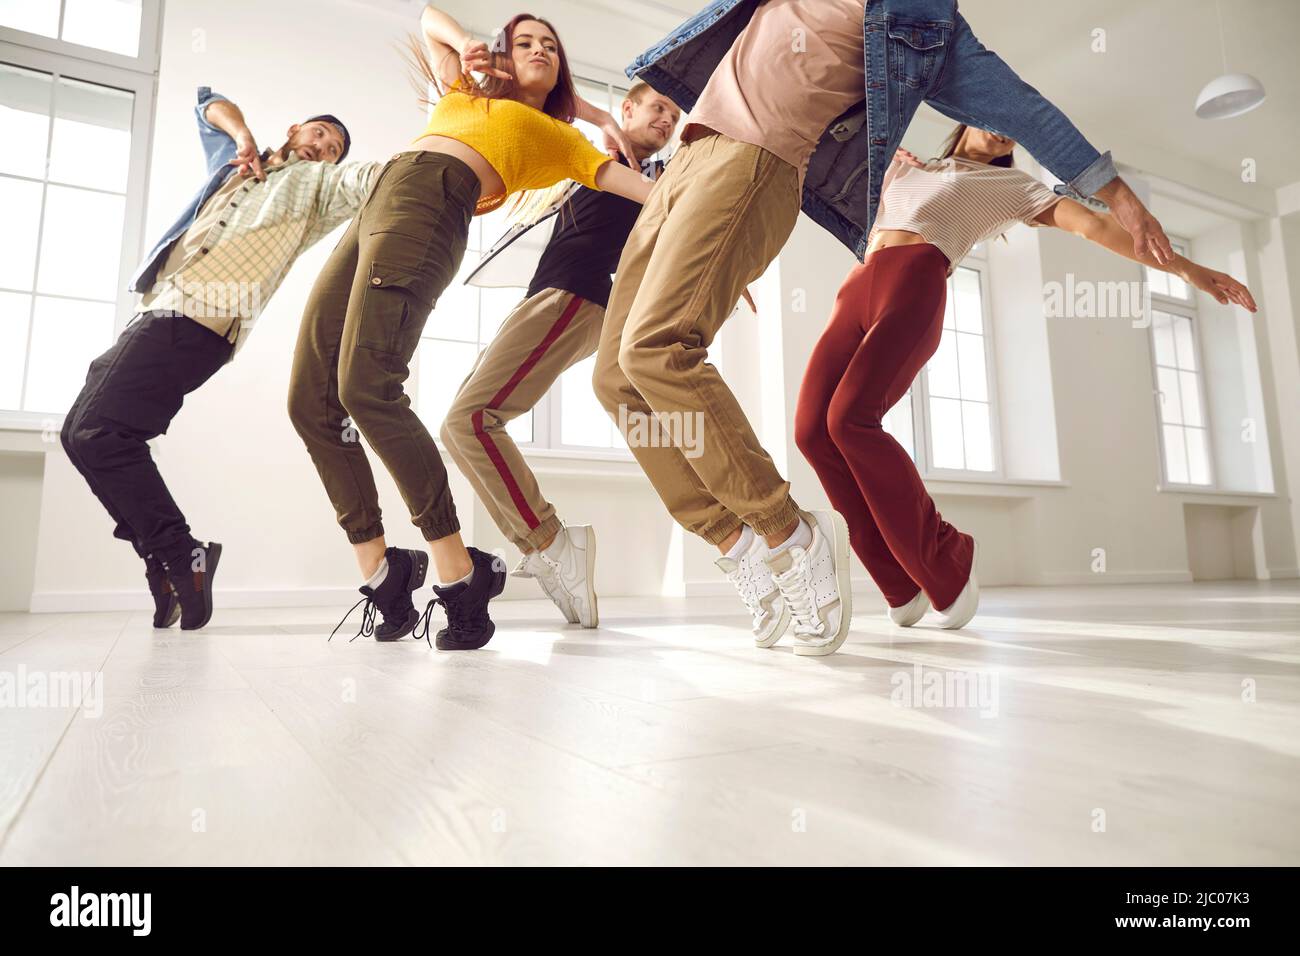 Group of young hip-hop dancers rehearse together and learn new choreography in dance studio. Stock Photo